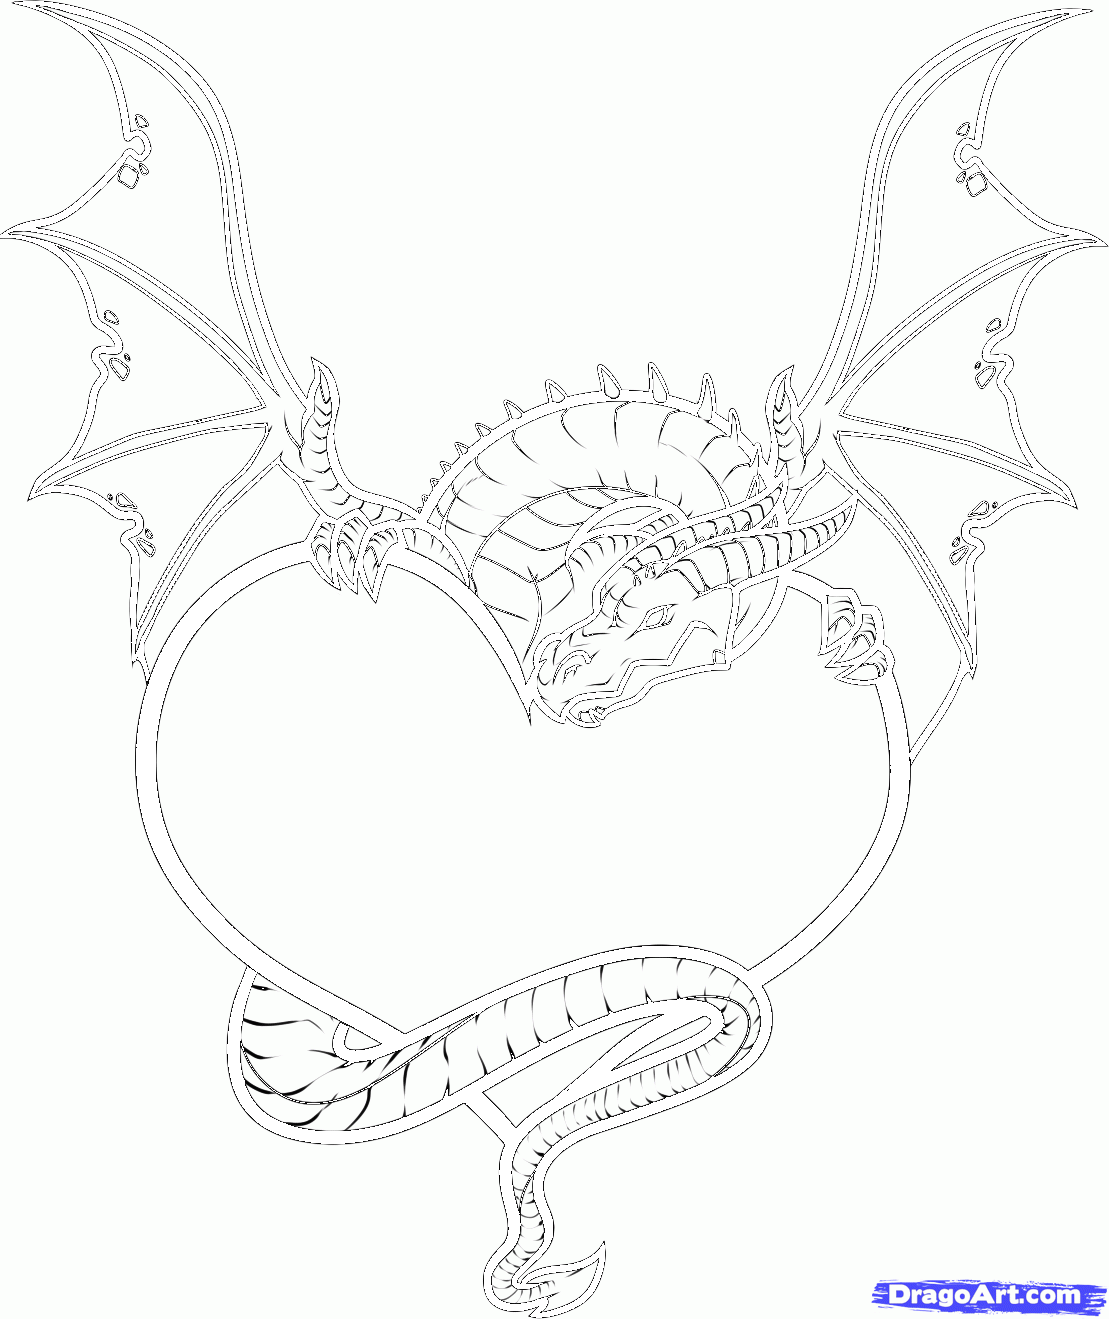 dragoart coloring pages hearts and roses